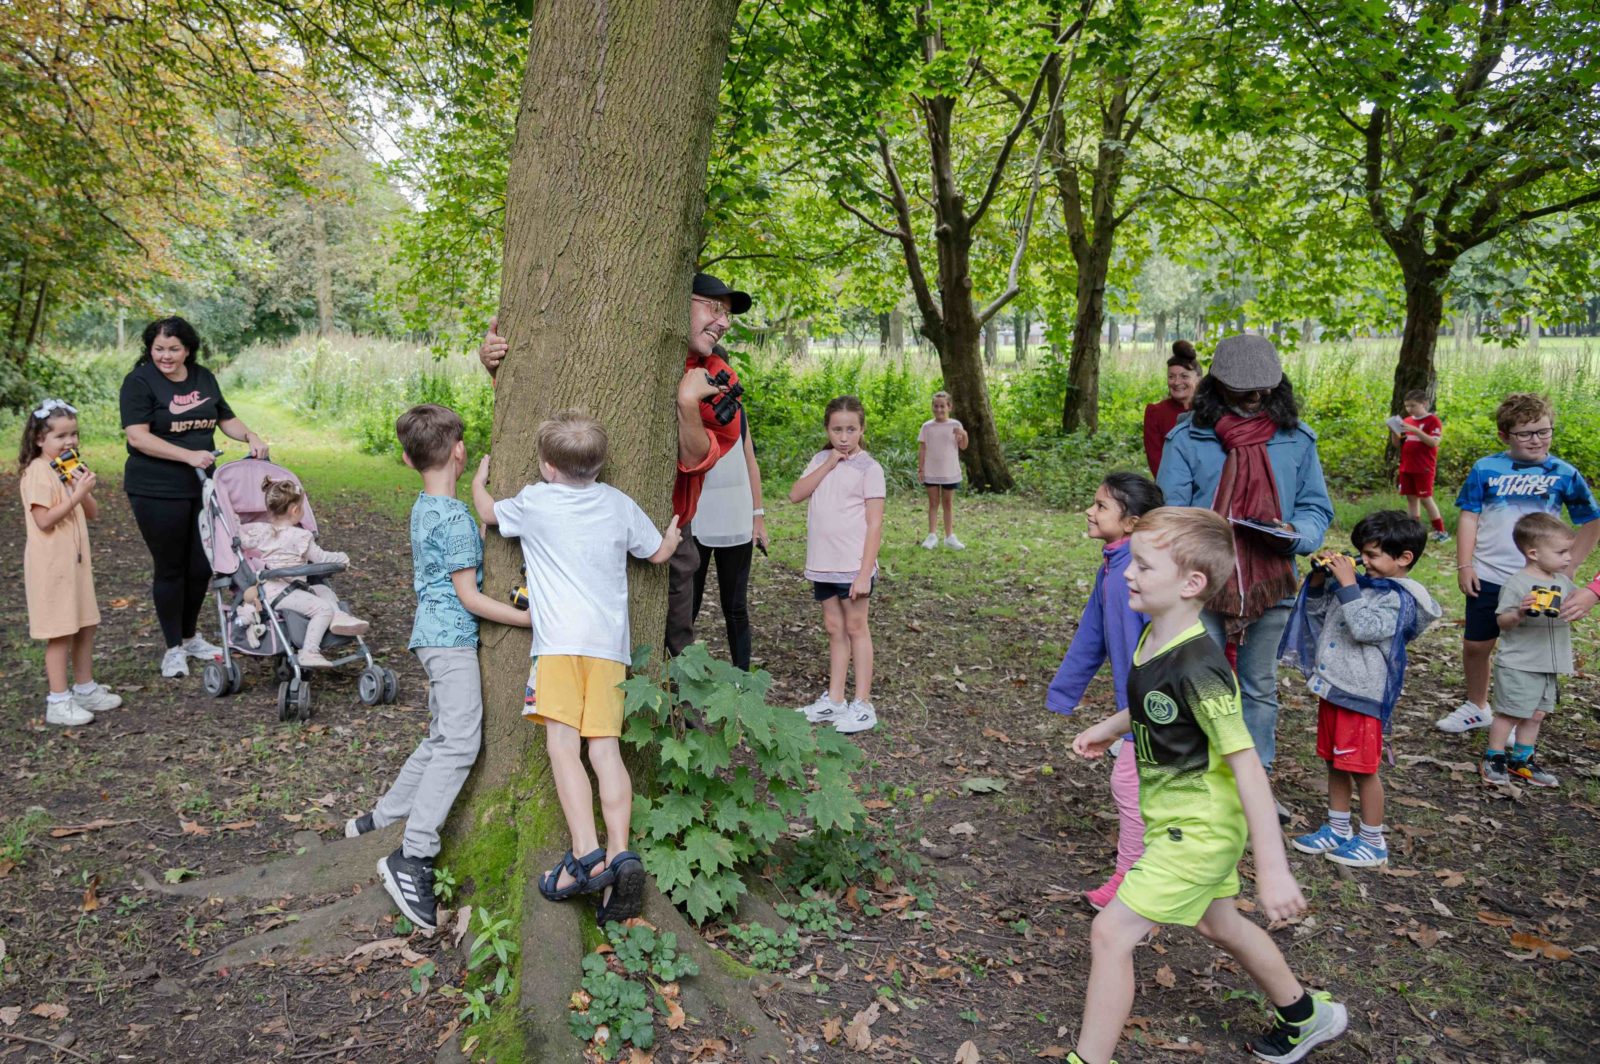 Kids and adults walk excitedly through the park. Paul peers from behind a tree smiling, two kids hug the same tree. Some of the children are holding binoculars.